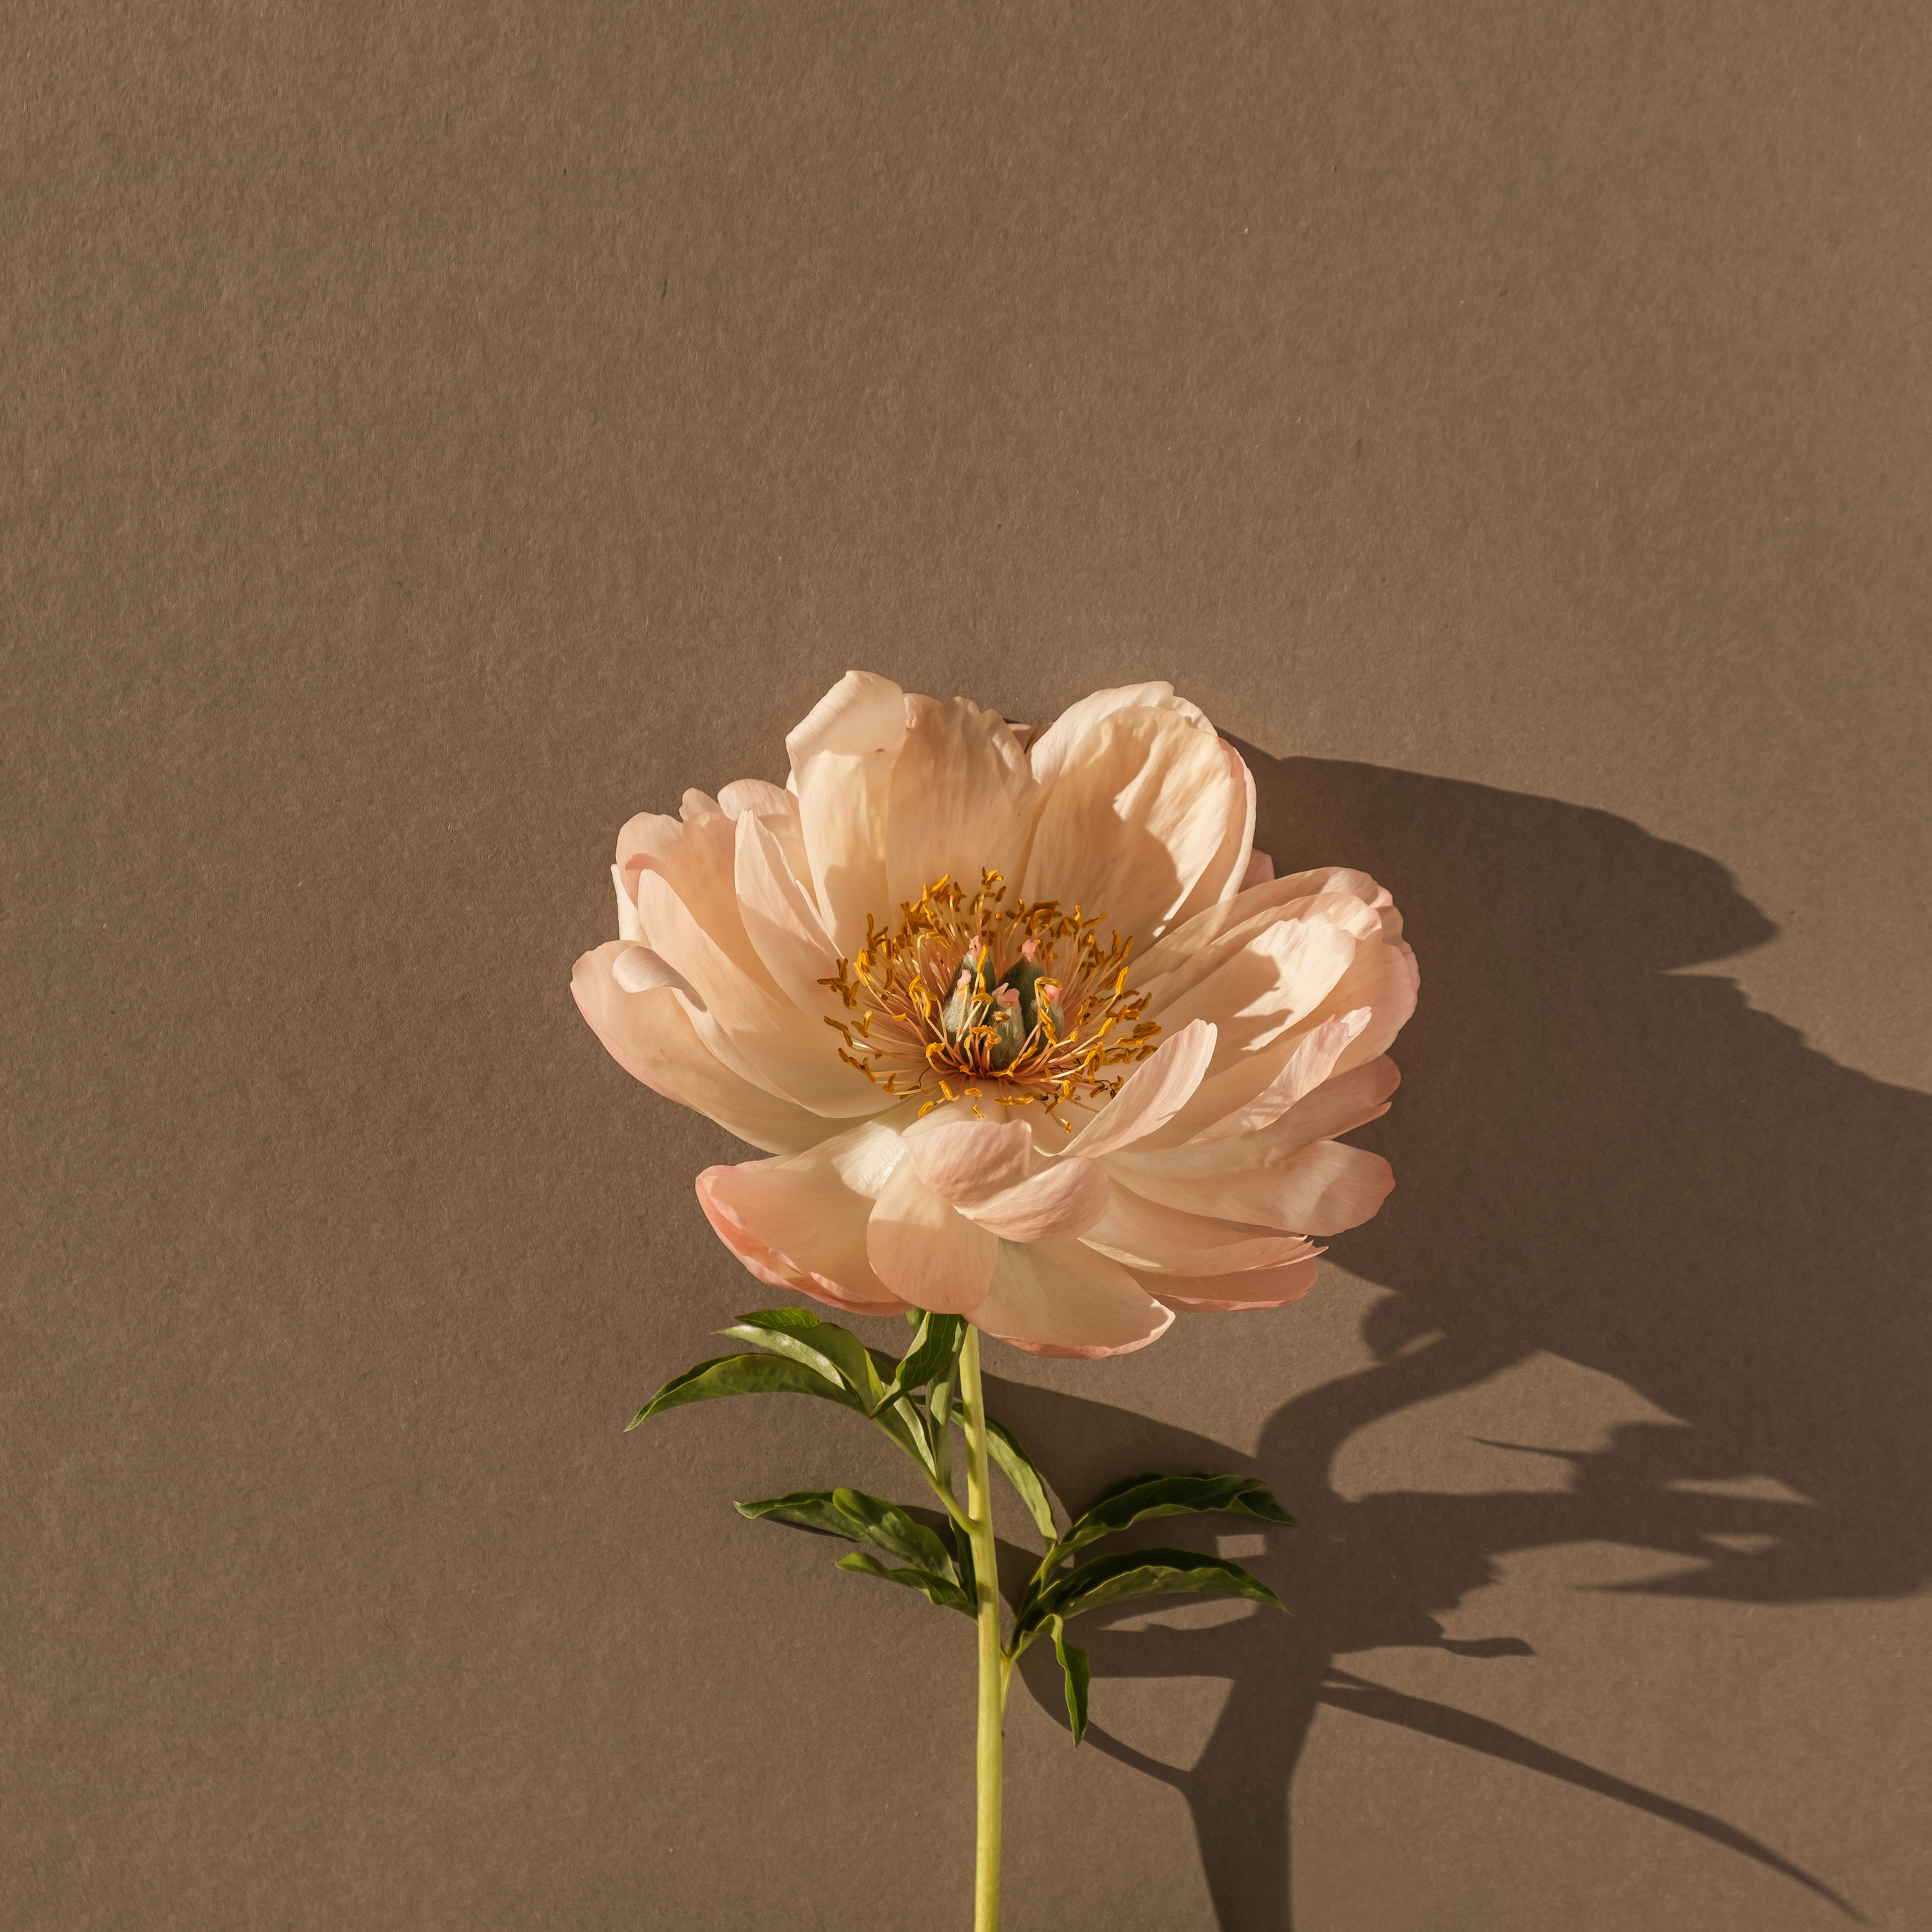 Peony Flower on Brown Background 